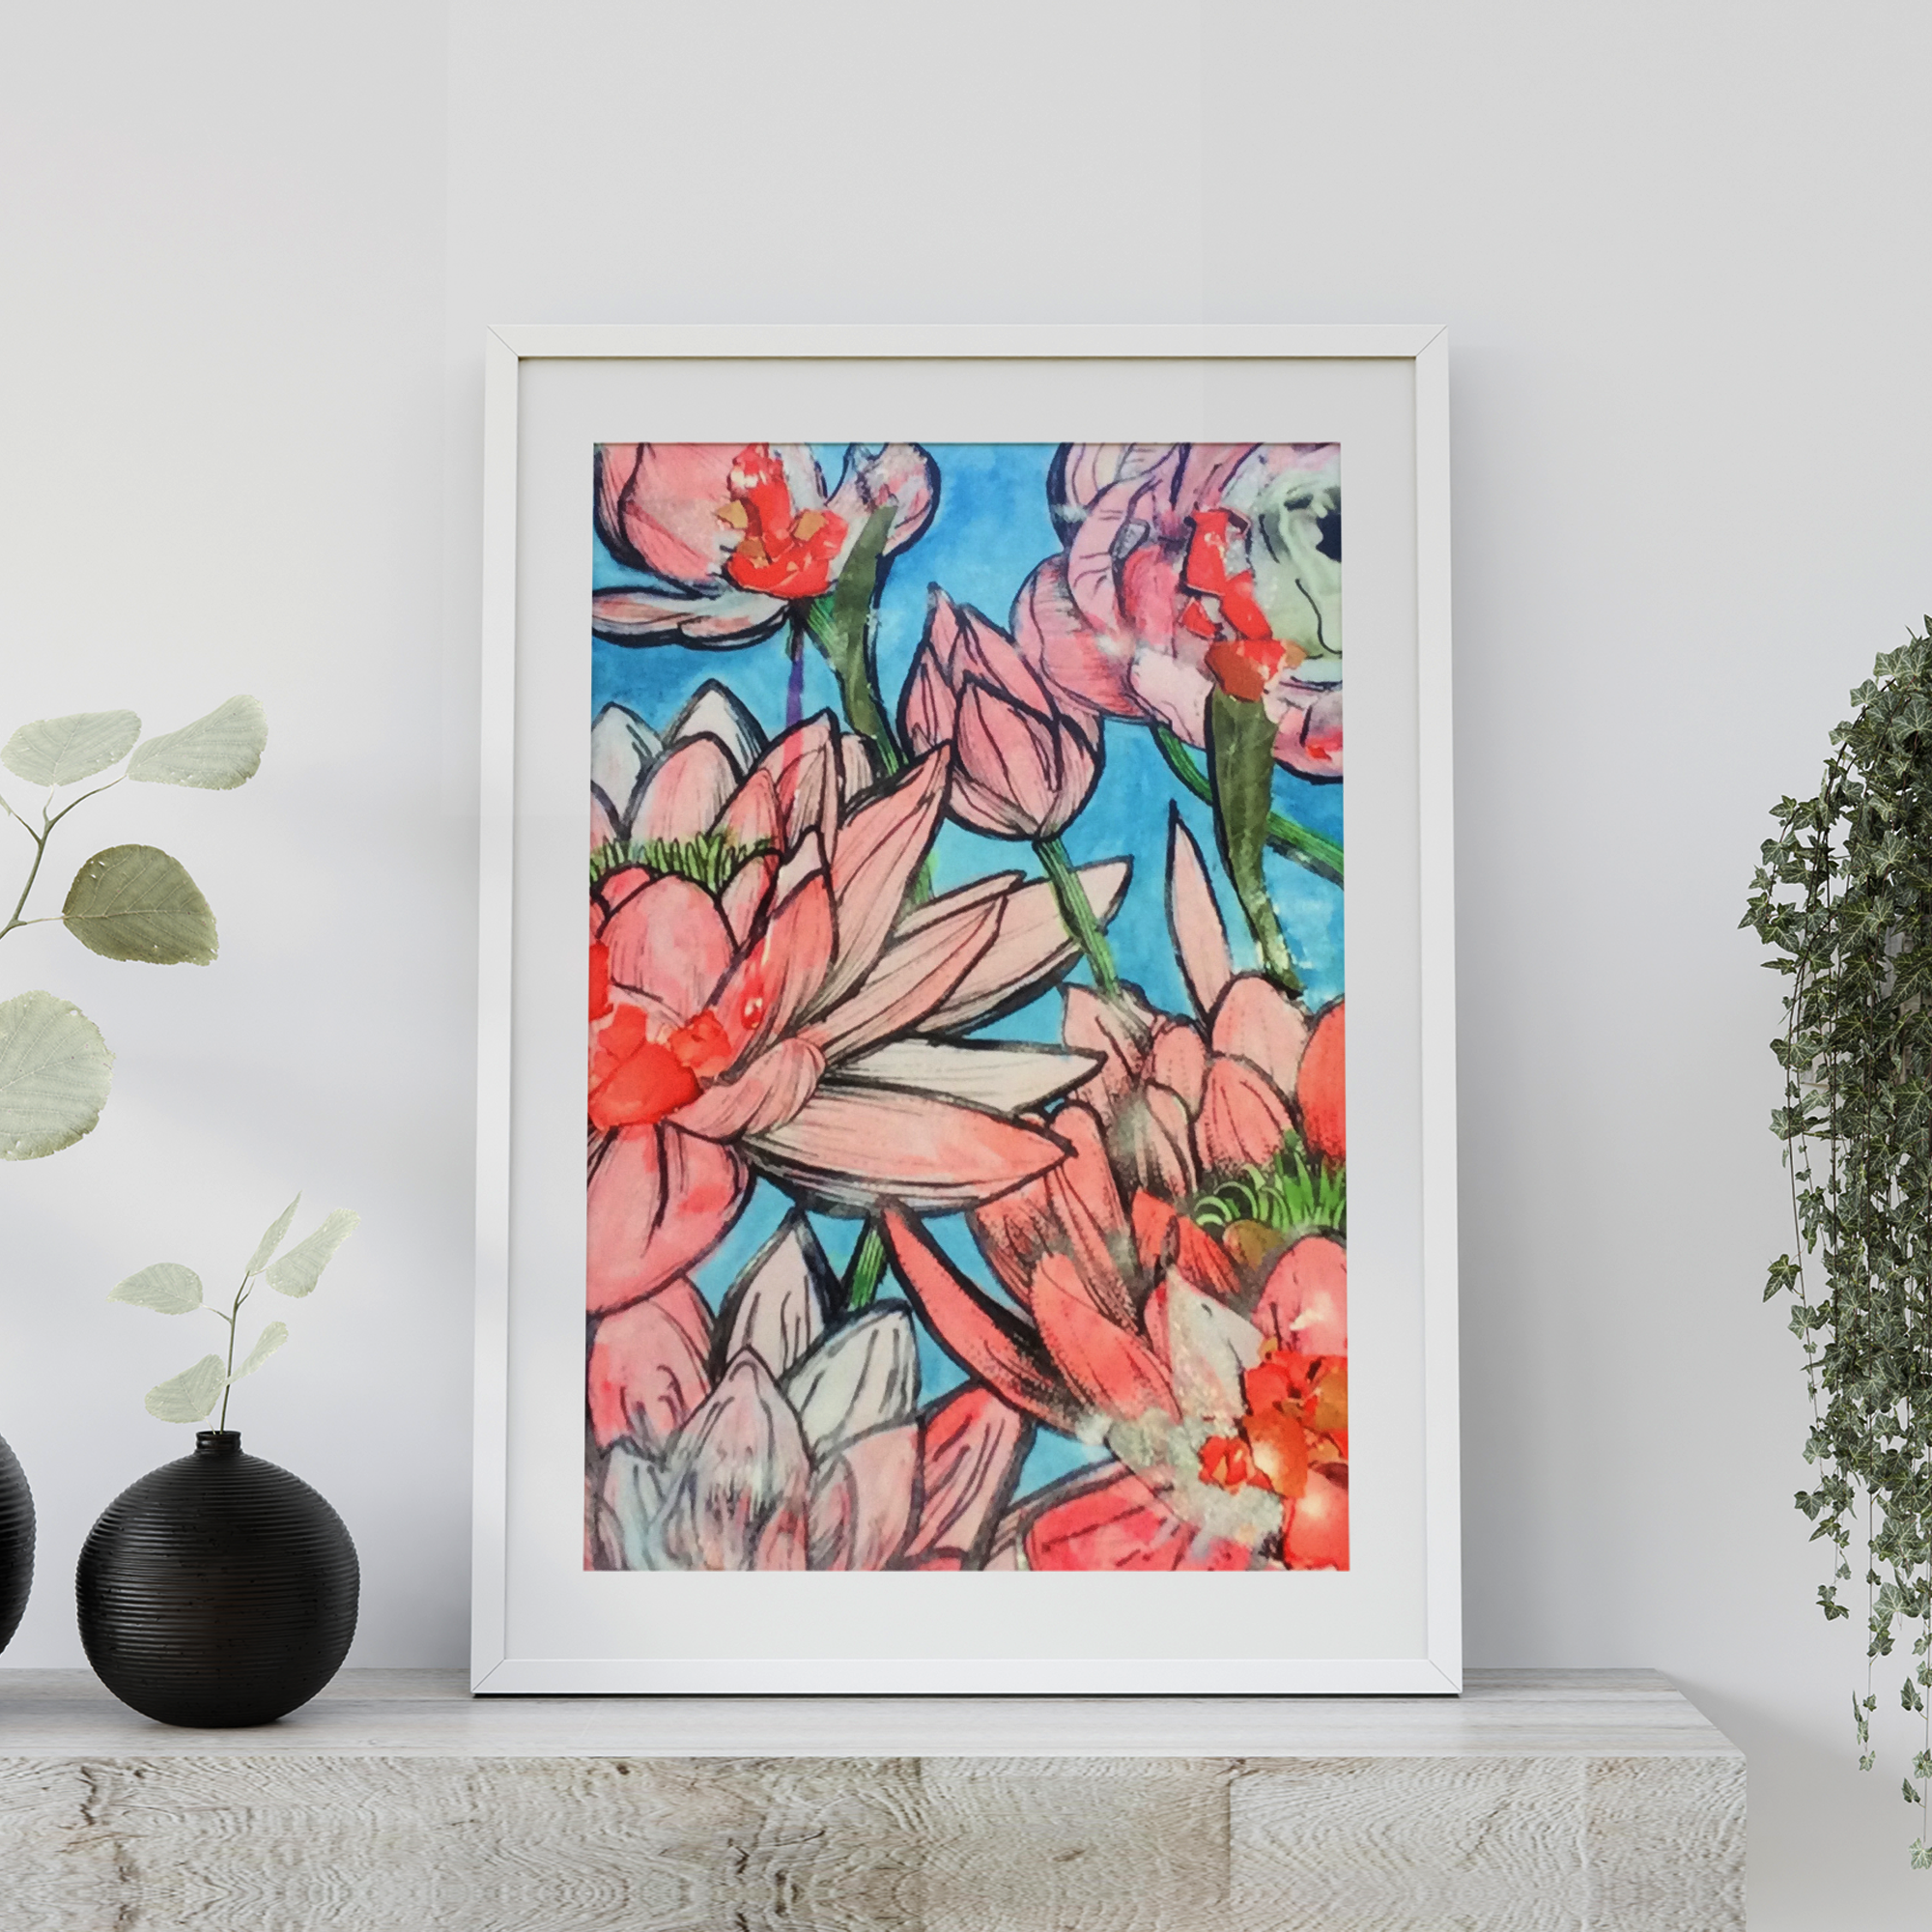 Original Art Print Mixed Medium
Watercolours, pressed paper and coloured eggshells as extra detail
Made to pop with colour
A3 size available in stock, other sizes by request